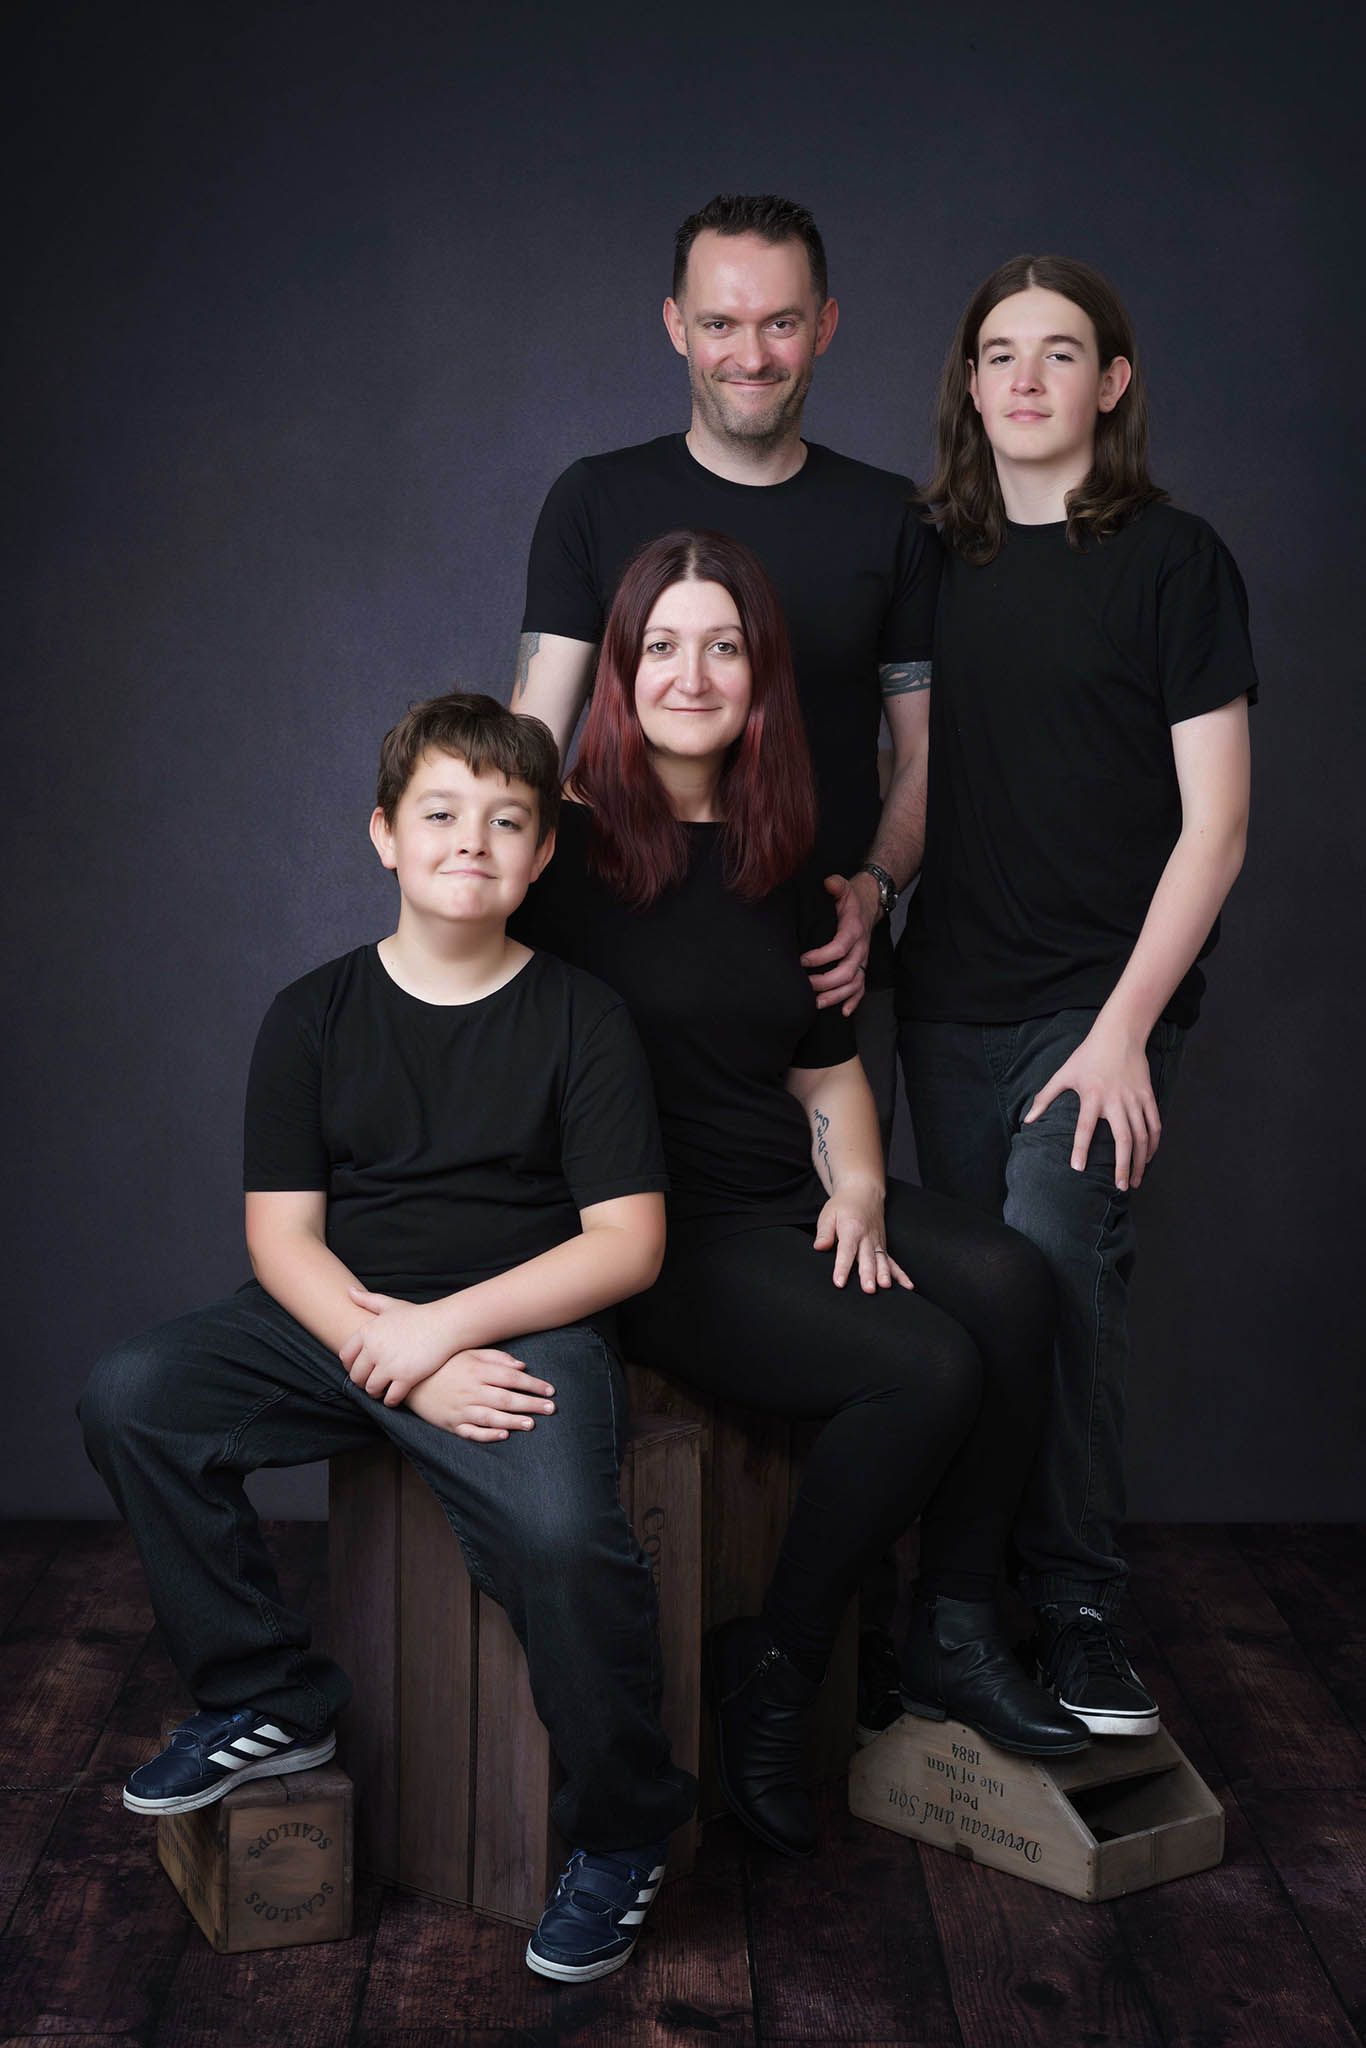 family in black on dark backround by Family photographer Lancashire